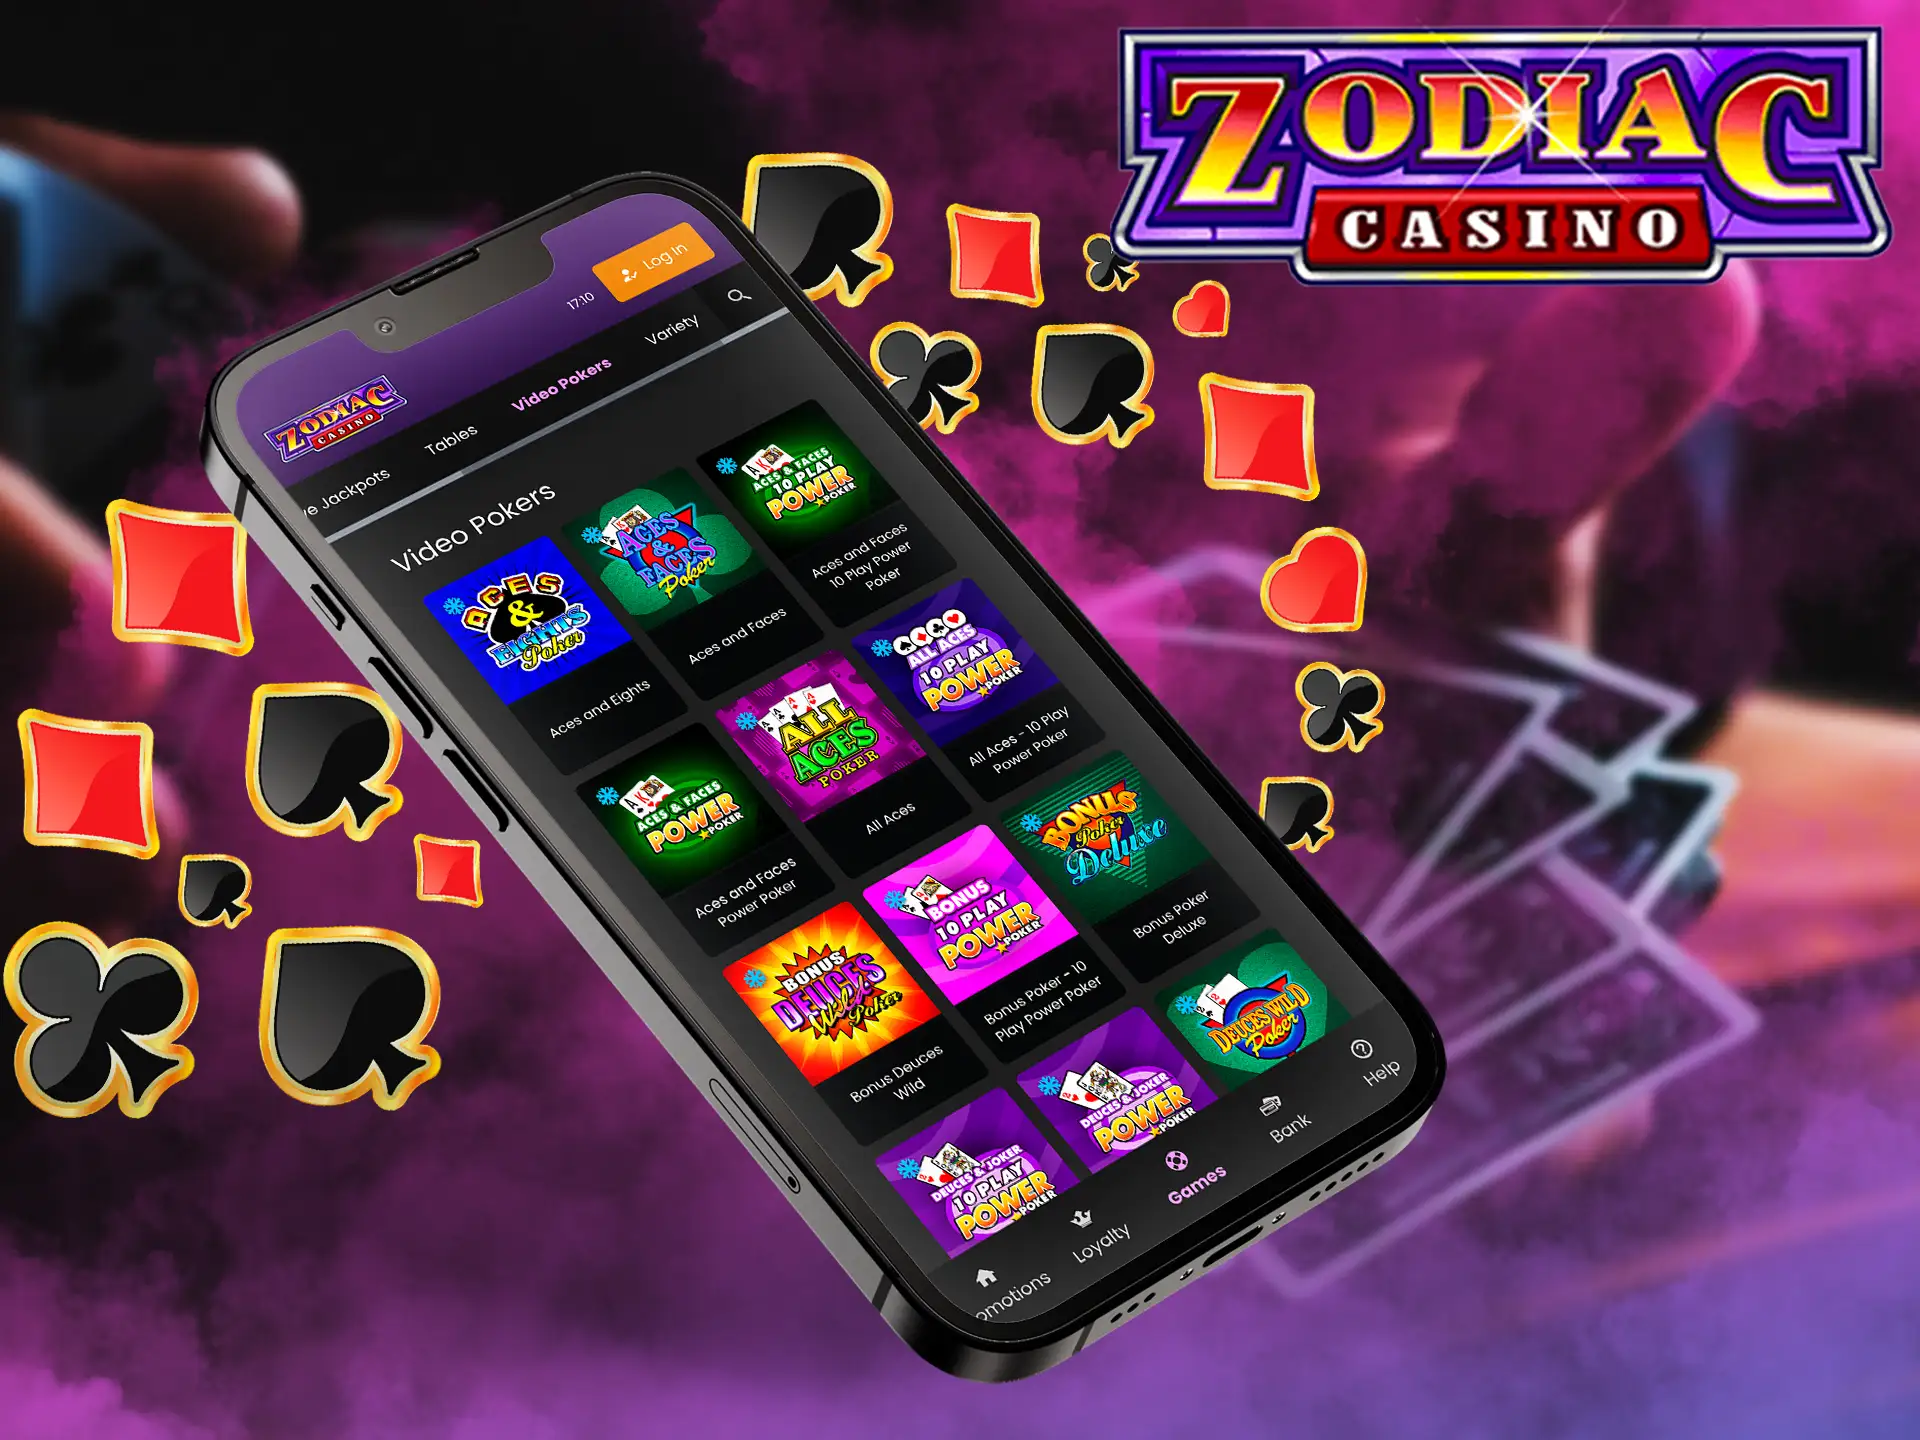 This section is available to play with real and virtual dealers, various card combinations are waiting for players Zodiac Casino.